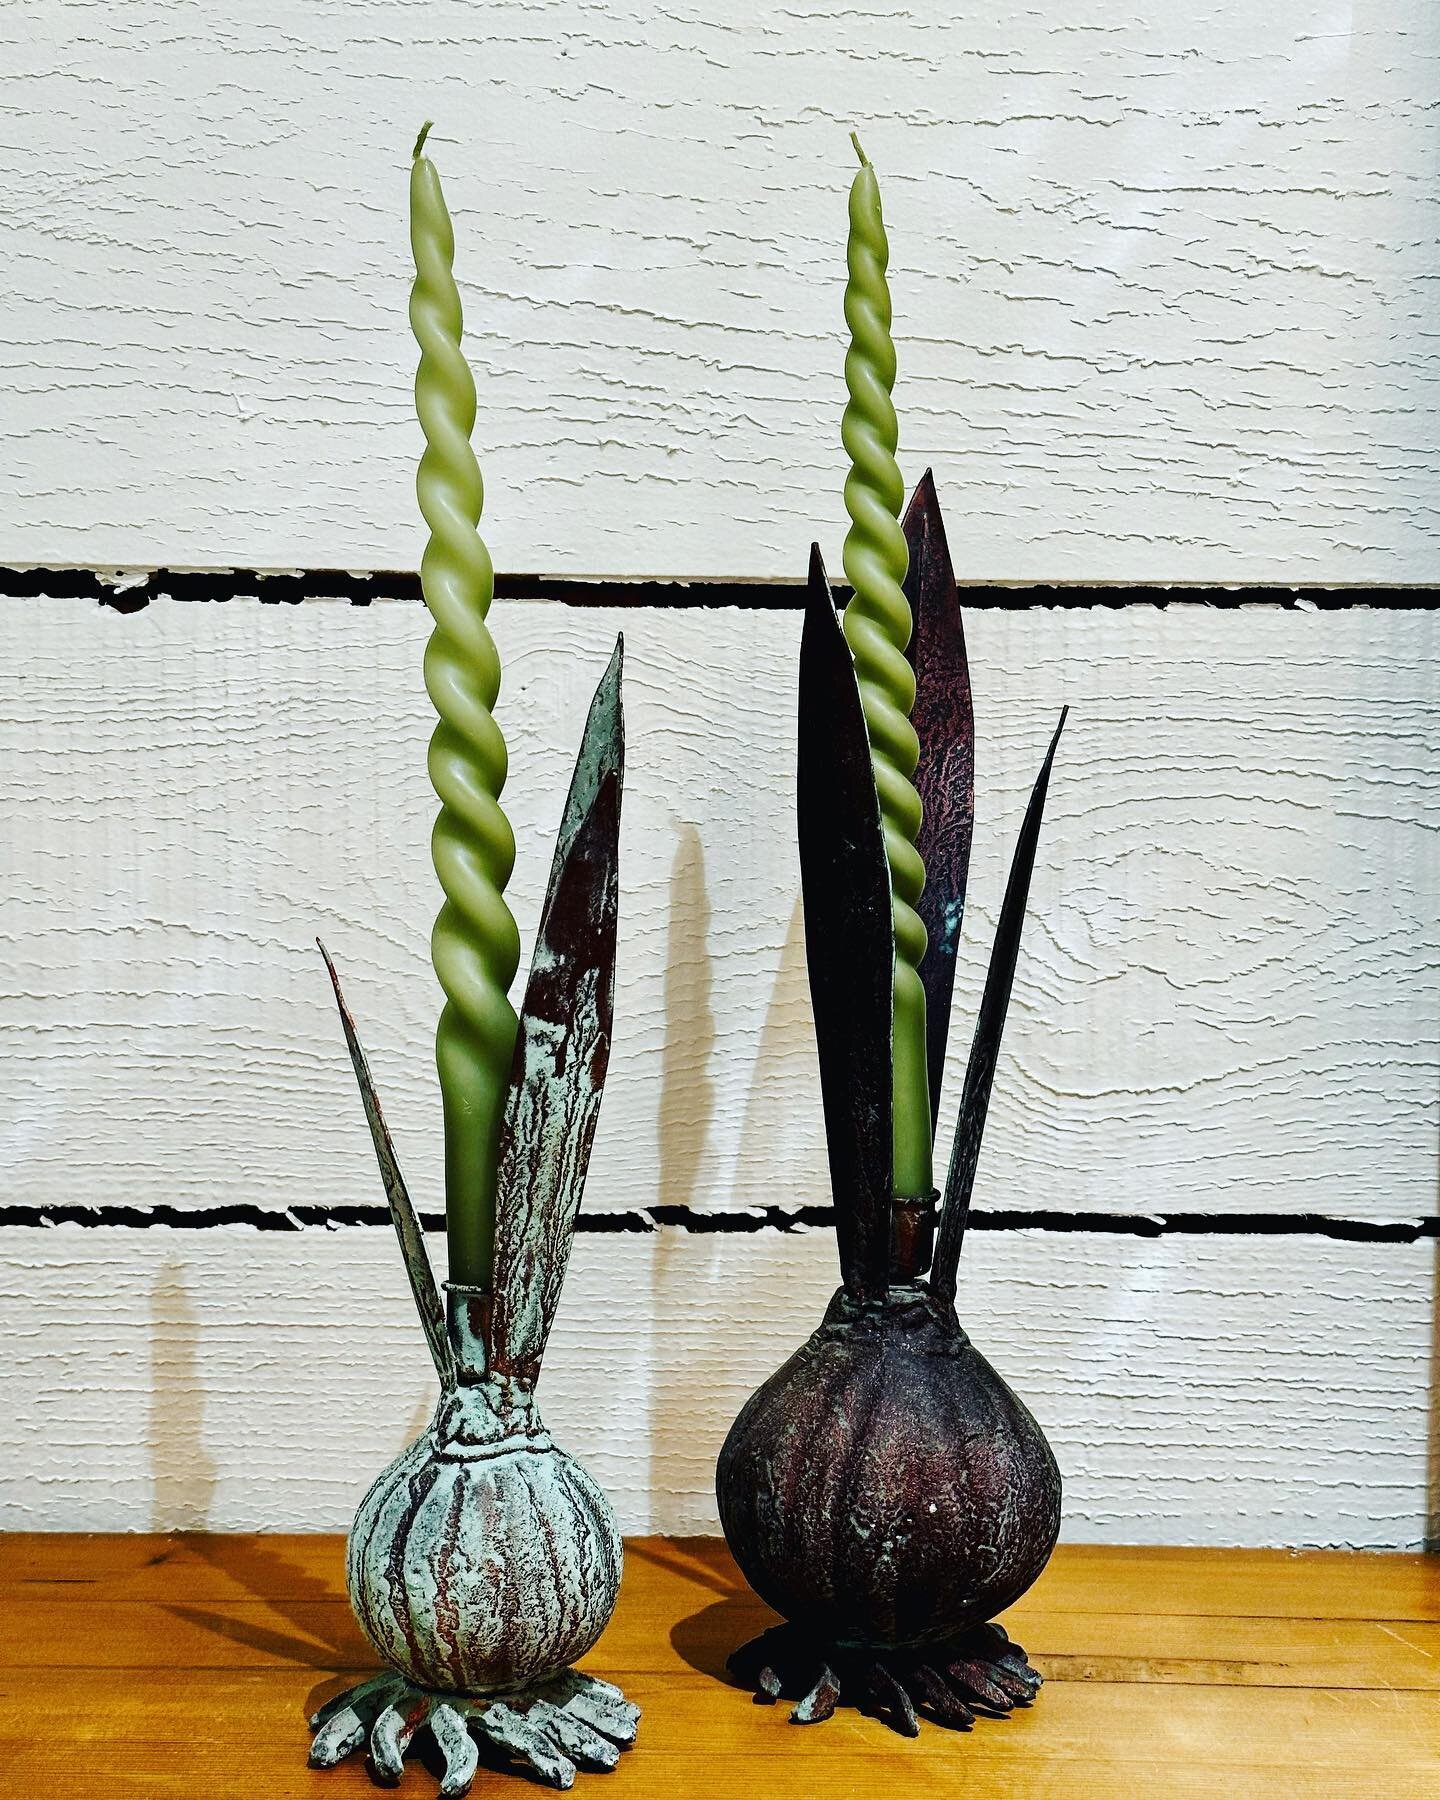 🌷Featured Spring items!🌷
Antique copper bulb candlesticks paired with our tapered twist candles in green.
Mint Florentine Planter filled with fresh lichen and gold leafed Easter eggs.
Come see us for a total Spring Refresh or a few finishing touche